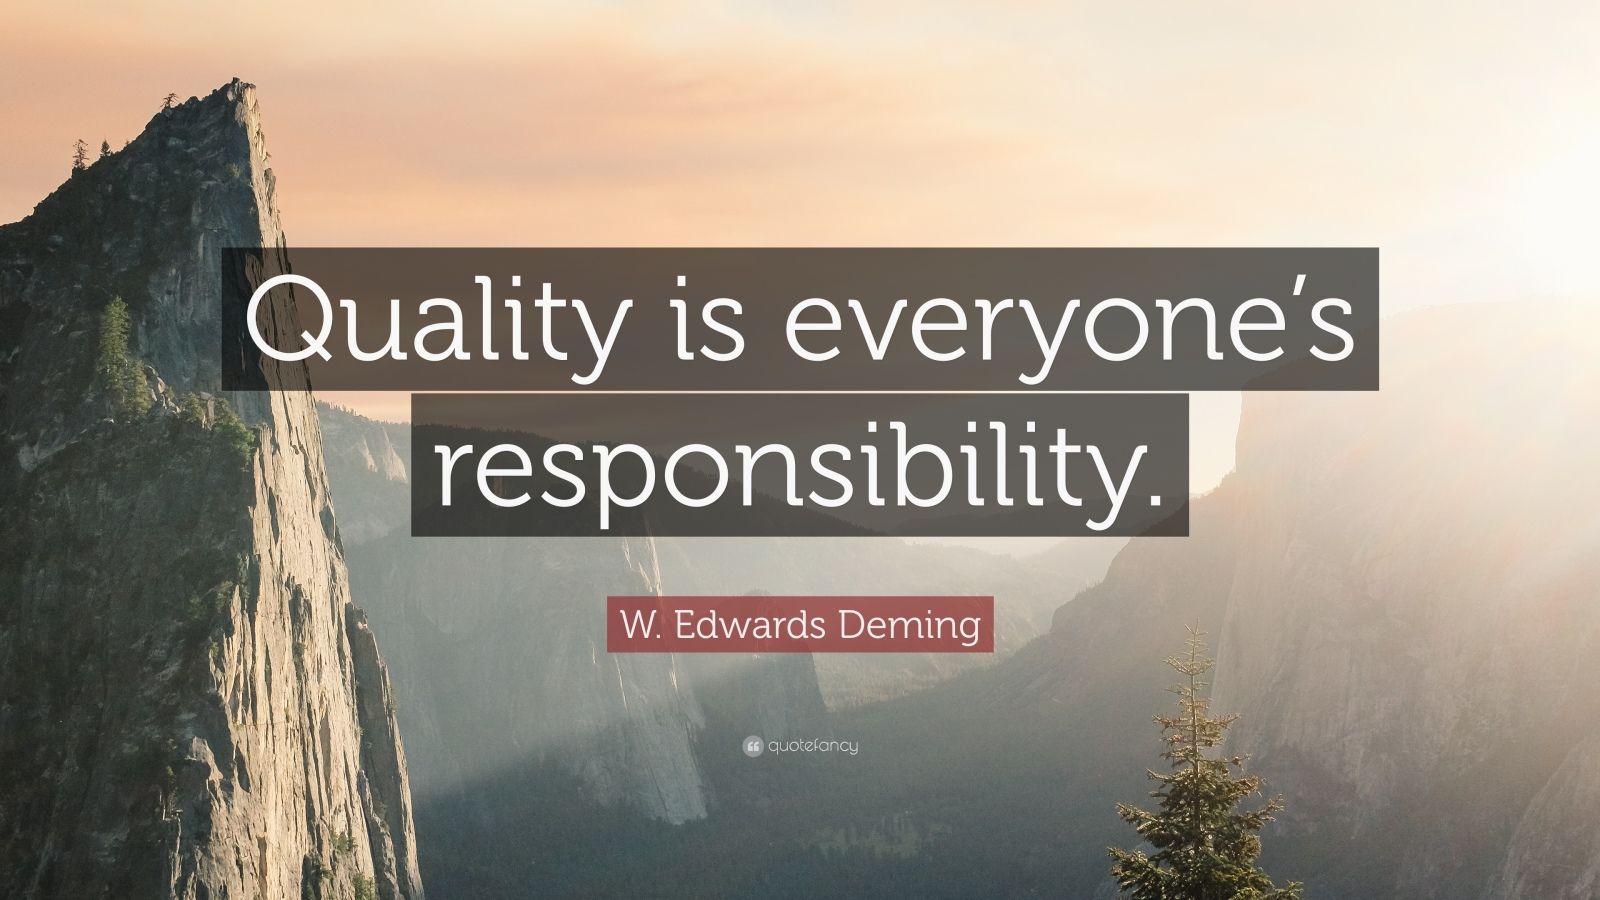 W. Edwards Deming Quote: “Quality is everyone’s responsibility.” (12